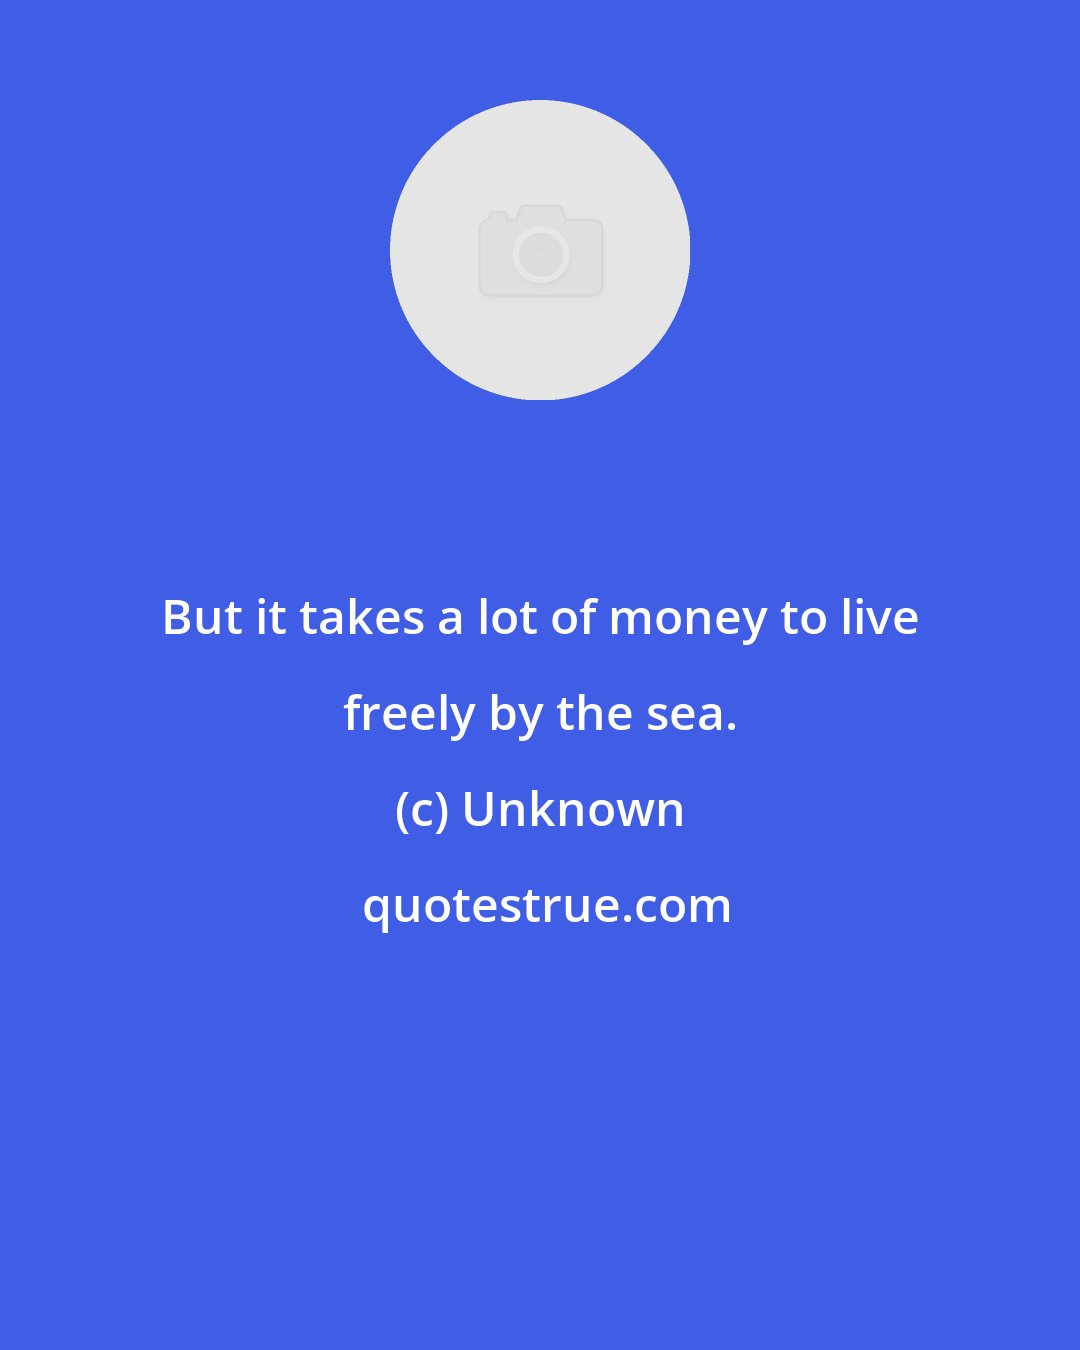 Unknown: But it takes a lot of money to live freely by the sea.